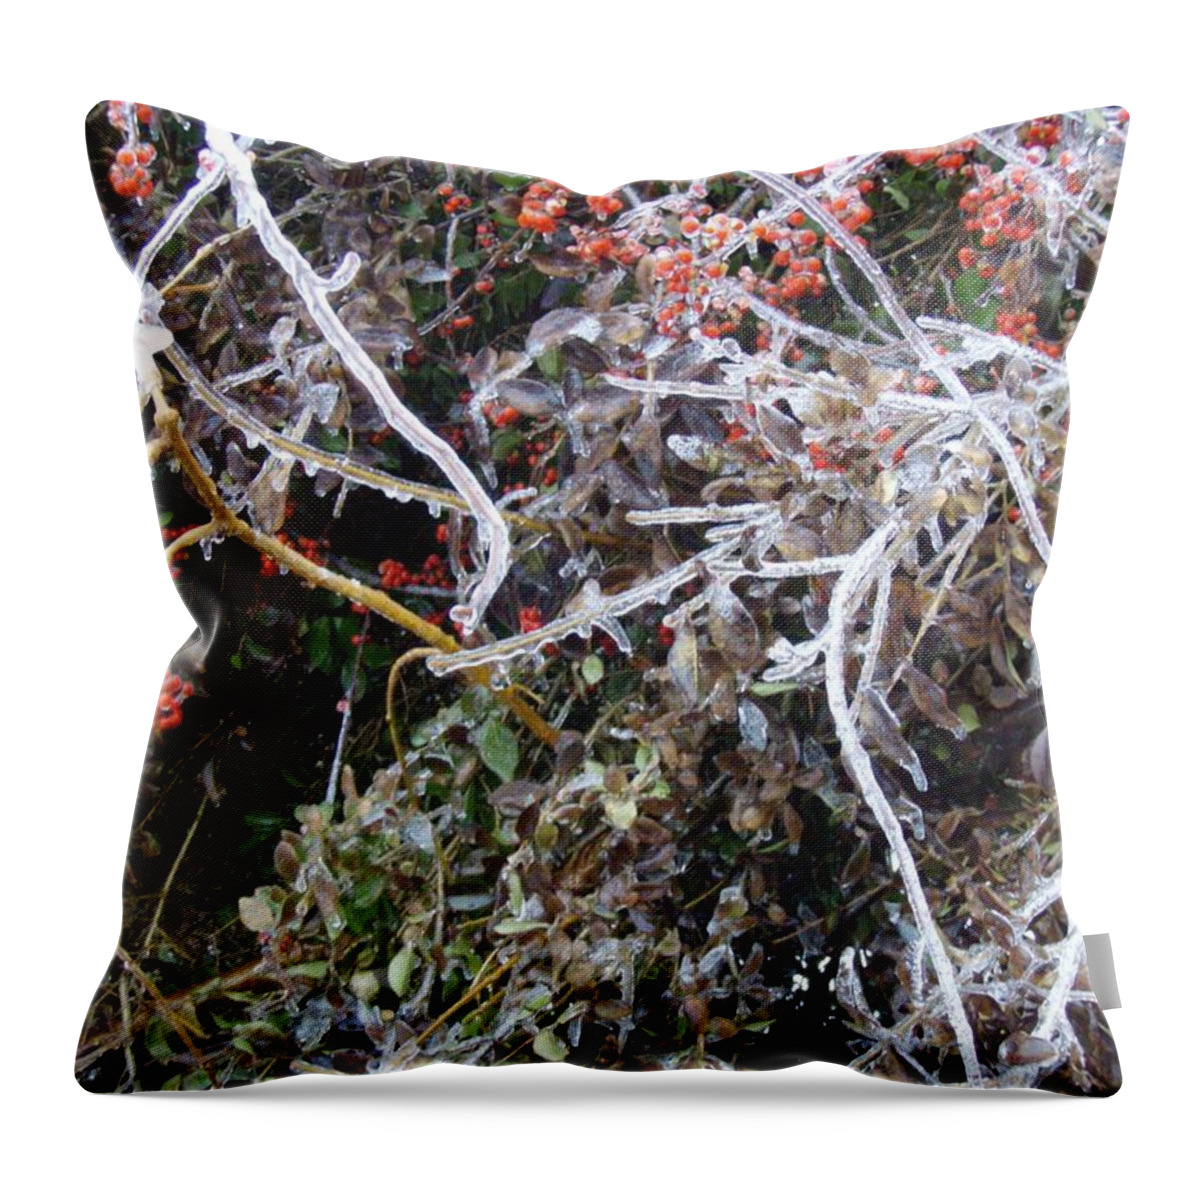 Natures Art Natural Ice Berries Vines Trees Sculpture Throw Pillow featuring the photograph Natures Art by Kristine Nora